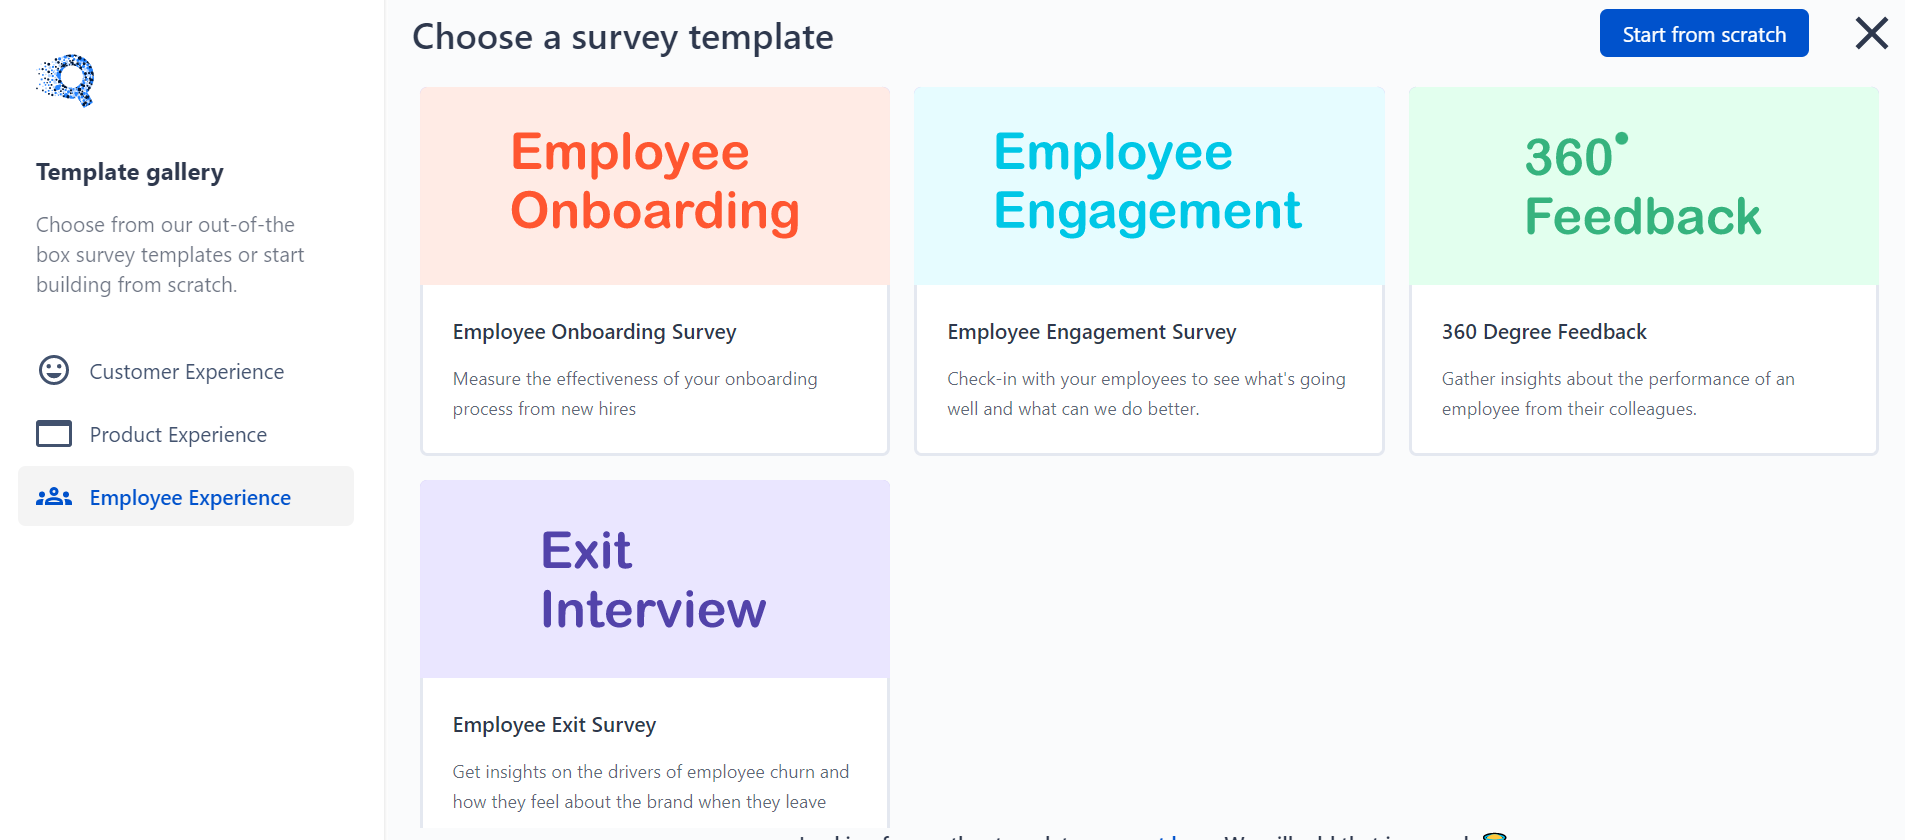 This is the image of survey templates of employee experience surveys - employee onboarding, employee engagement, 360-degree feedback, and exit interview.